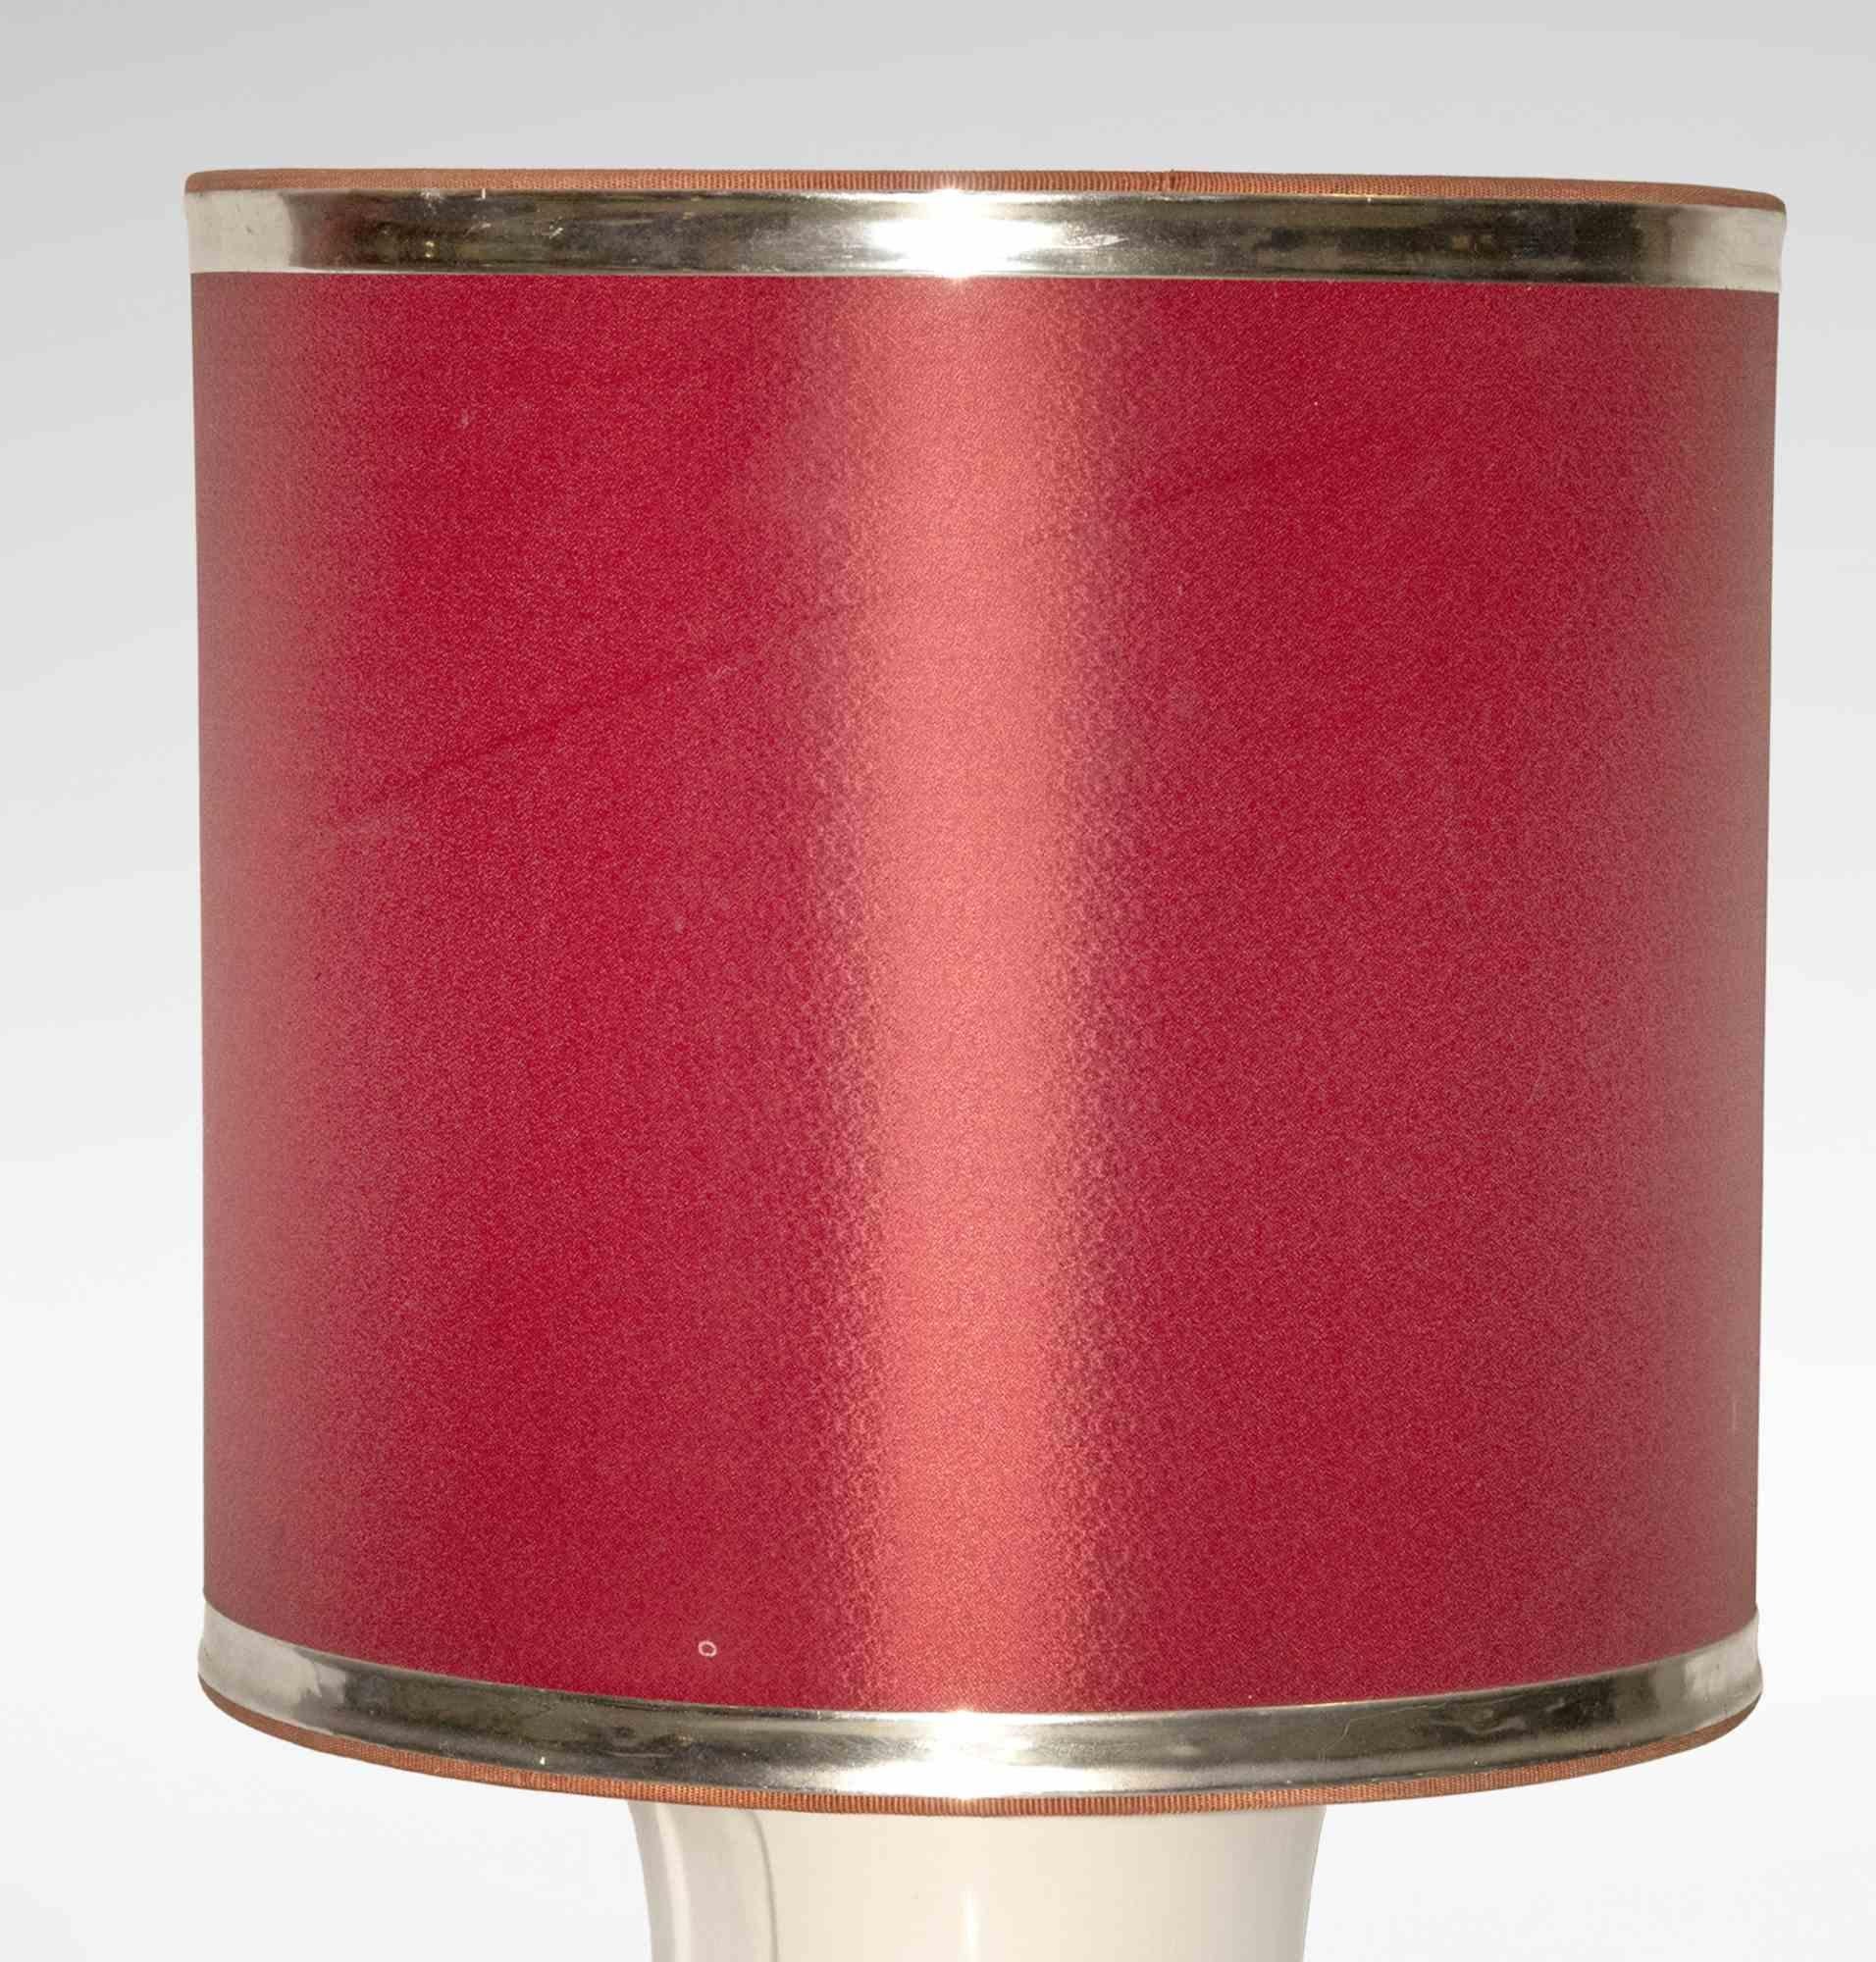 Vintage bamboo lamp is an original design lamp realized in the 1970s.

A vintage lamp in ceramic and brass with a red fabric lampshade.

Don't miss this opportunity.